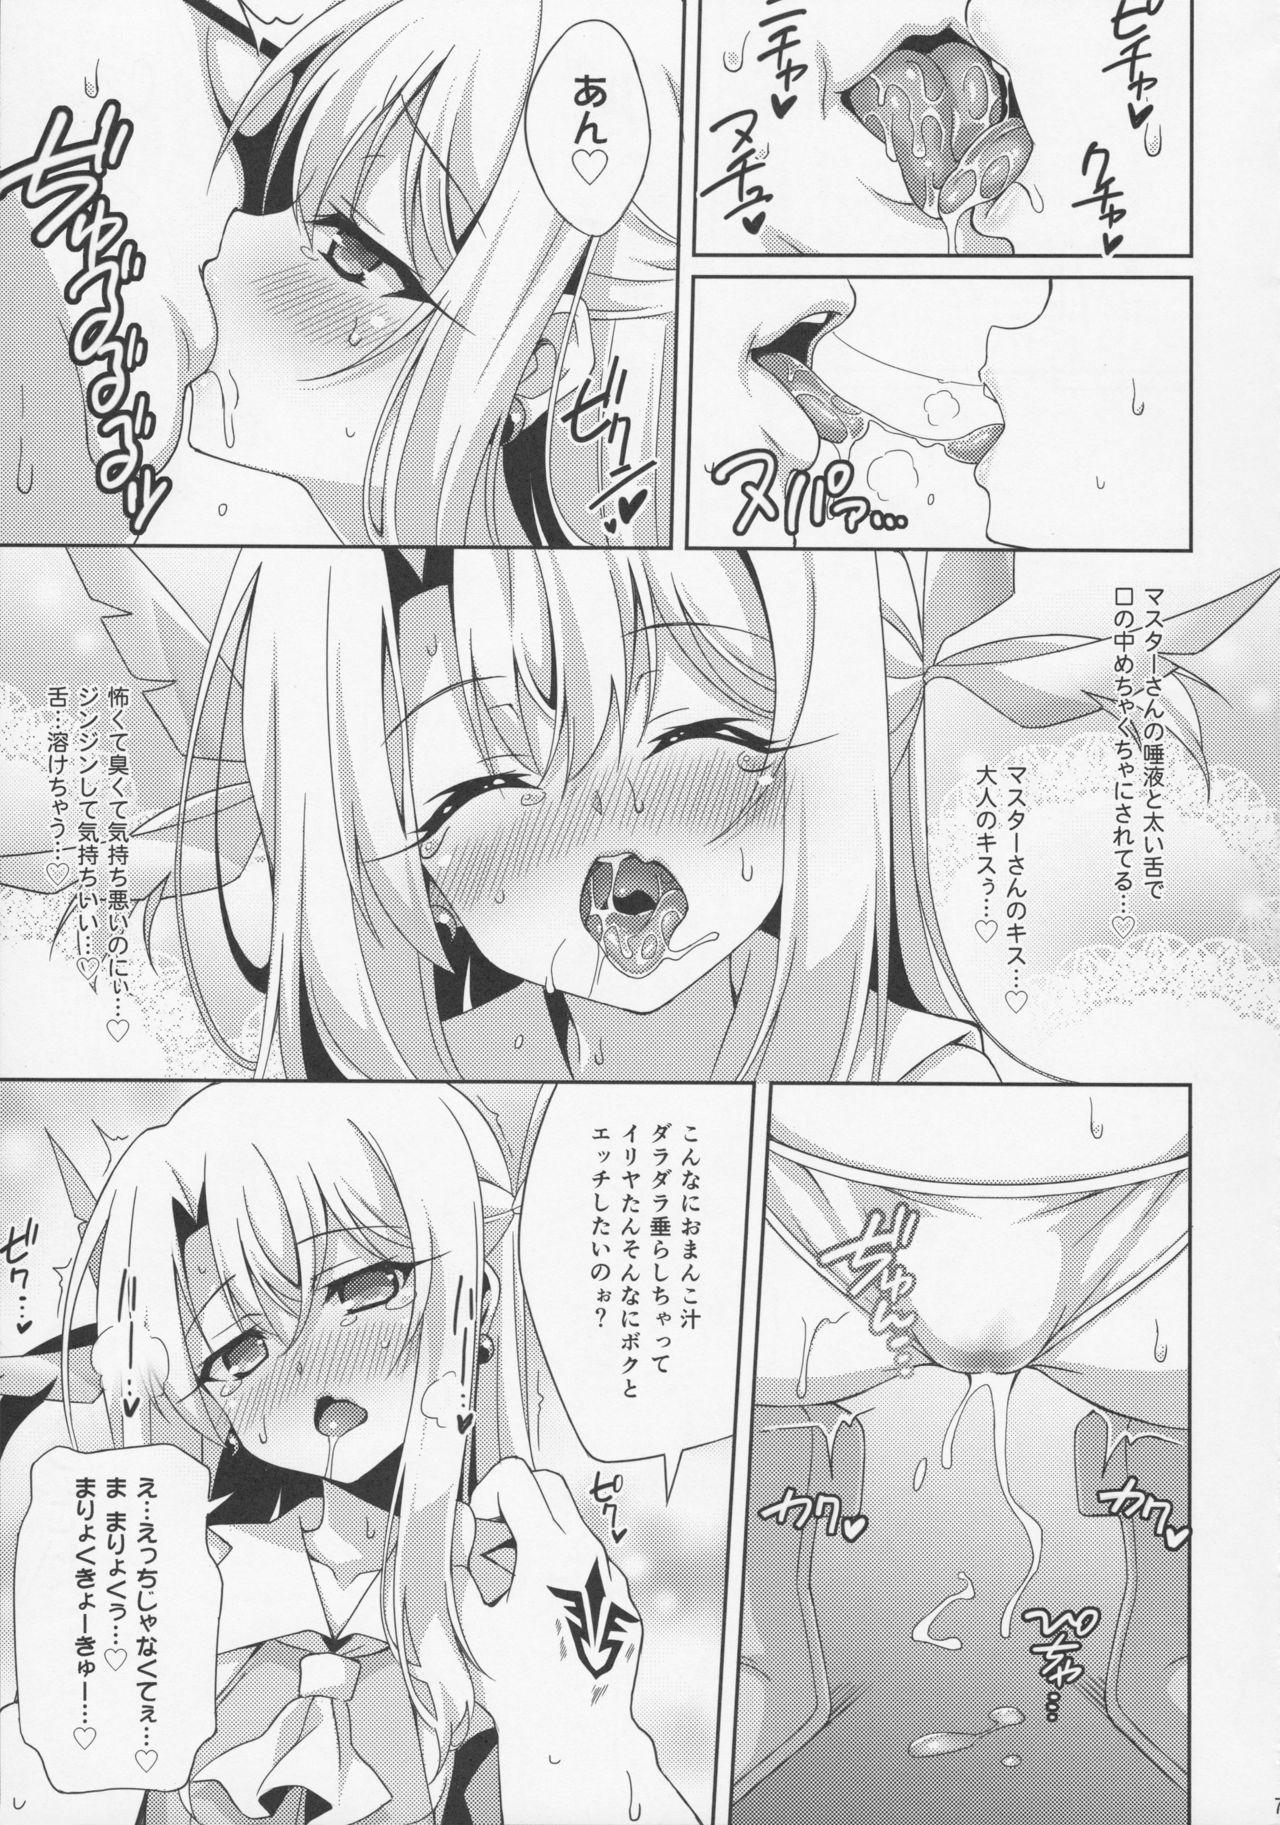 Spanking Illya-chan to Love Love Reijyux - Fate grand order Fate kaleid liner prisma illya Abg - Page 10